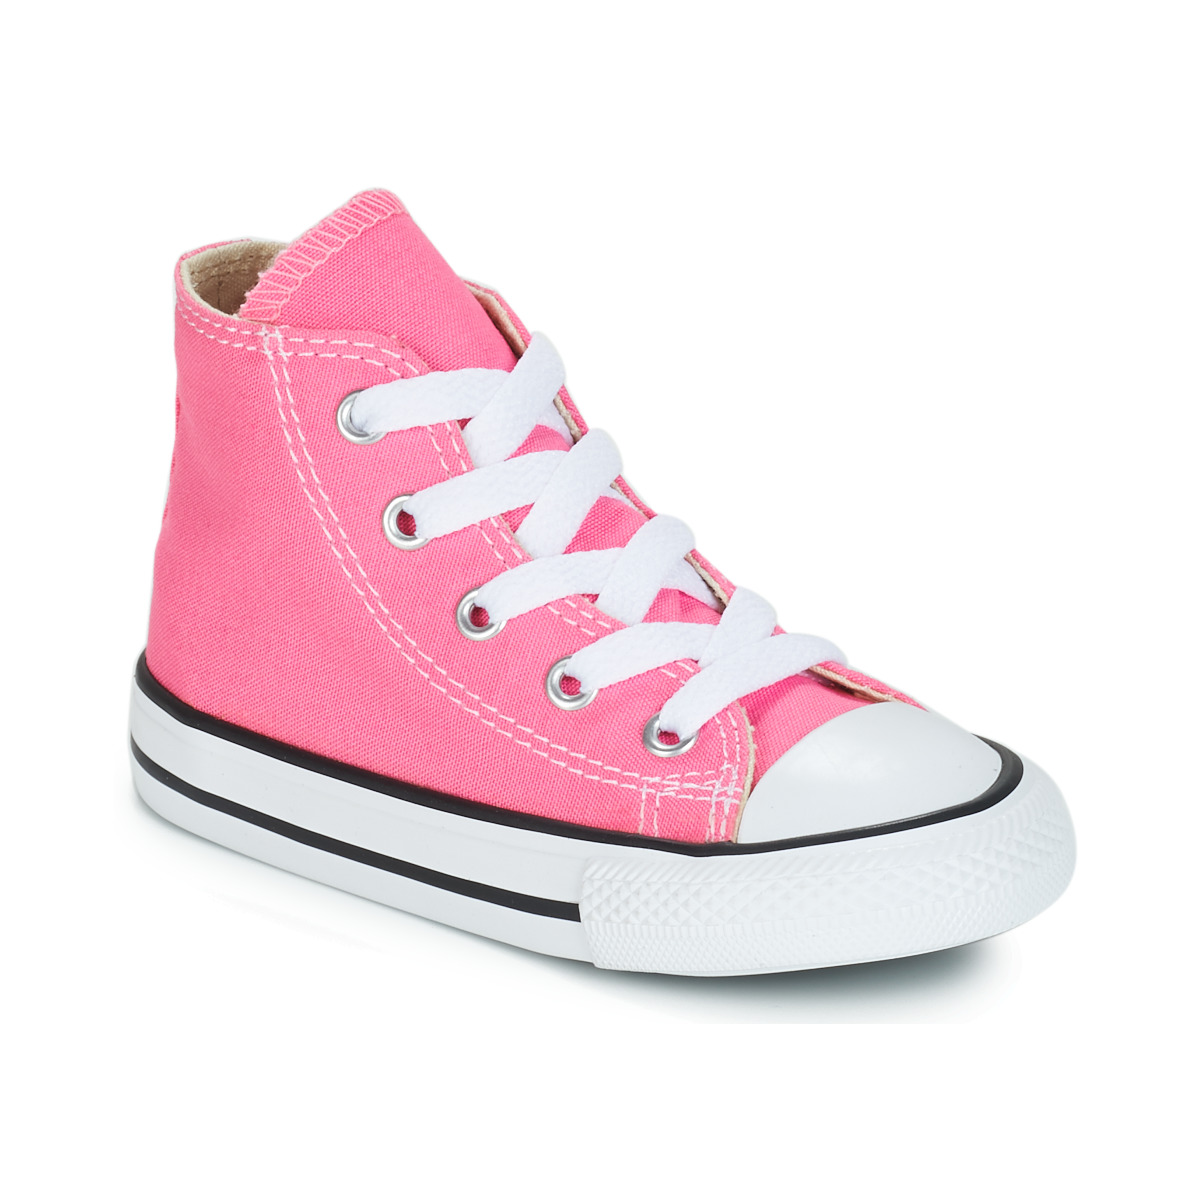 Chaussures Fille Converse Fall Winter 2019 Q3 CHUCK TAYLOR ALL STAR CORE HI Rose